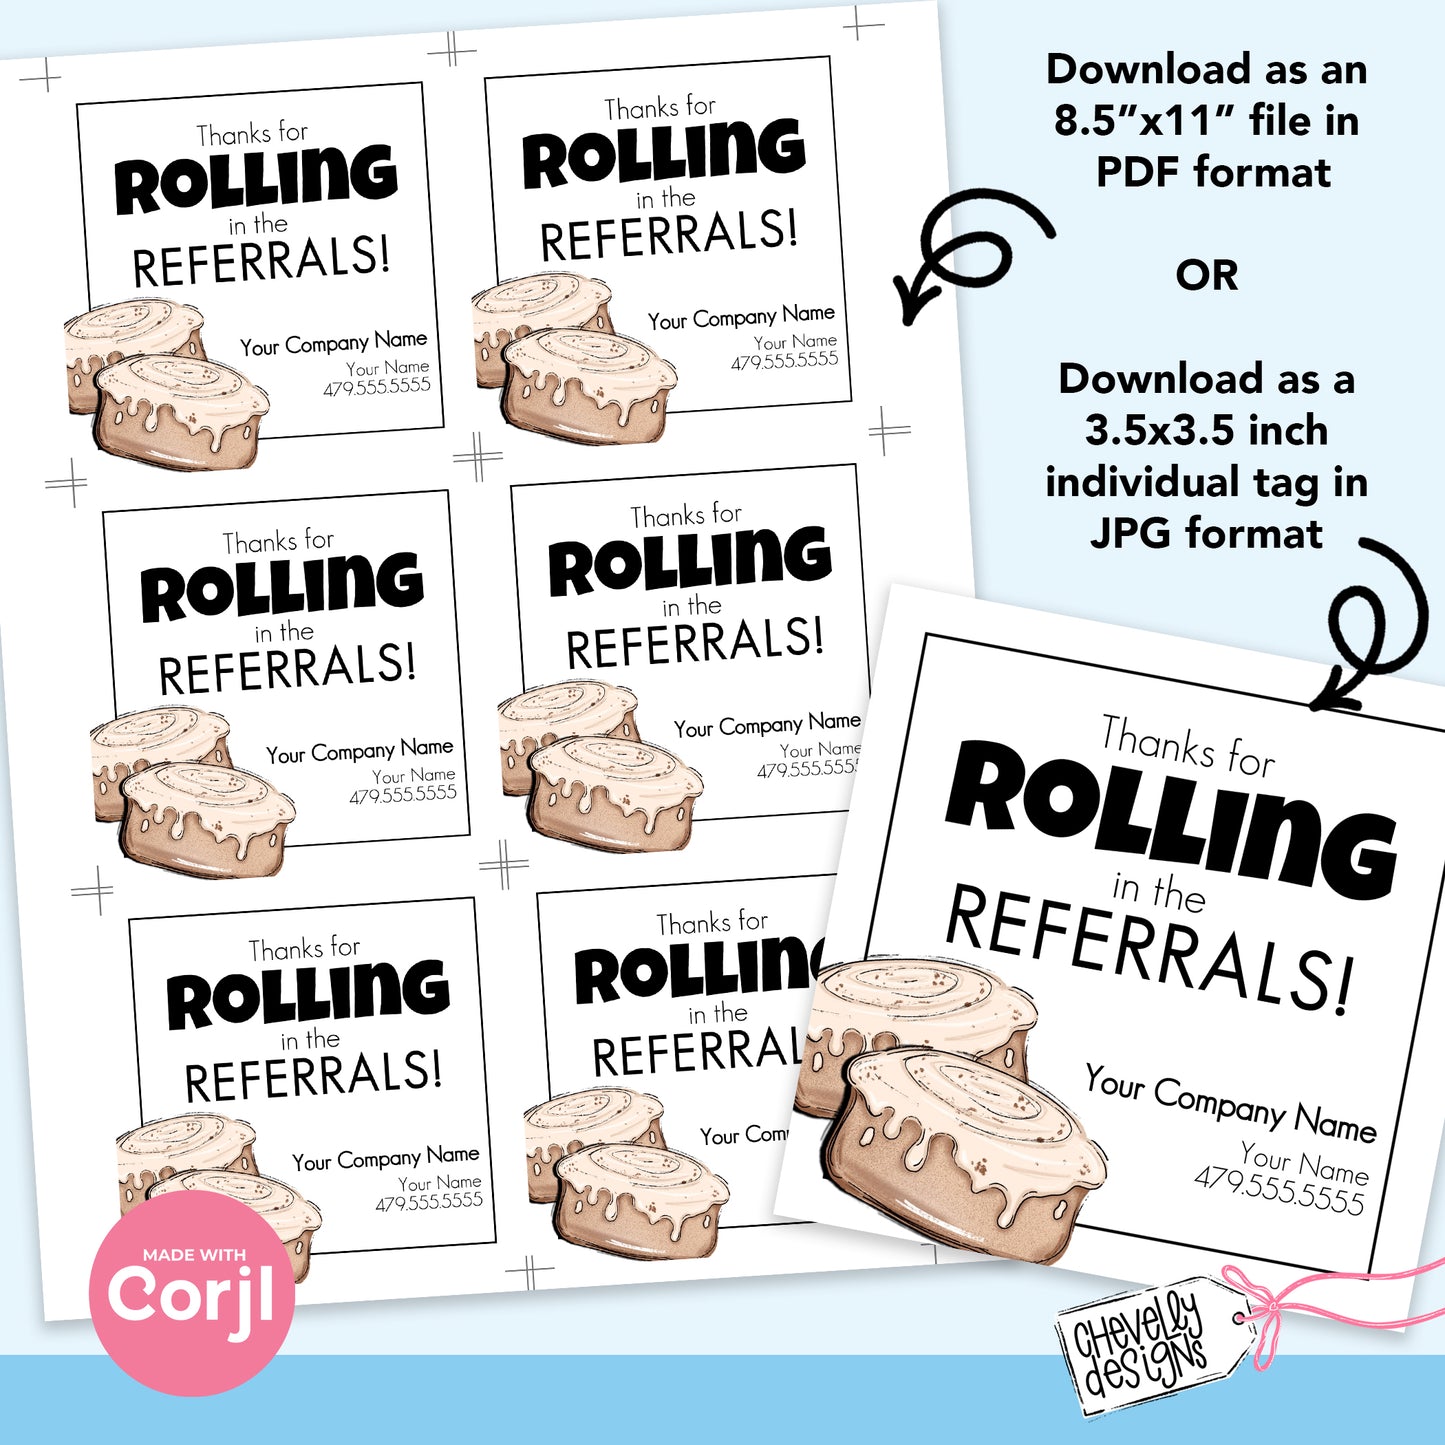 EDITABLE - Thanks for Rolling in the Referrals - Cinnamon Roll - Marketing Gift Tag - Printable Digital File